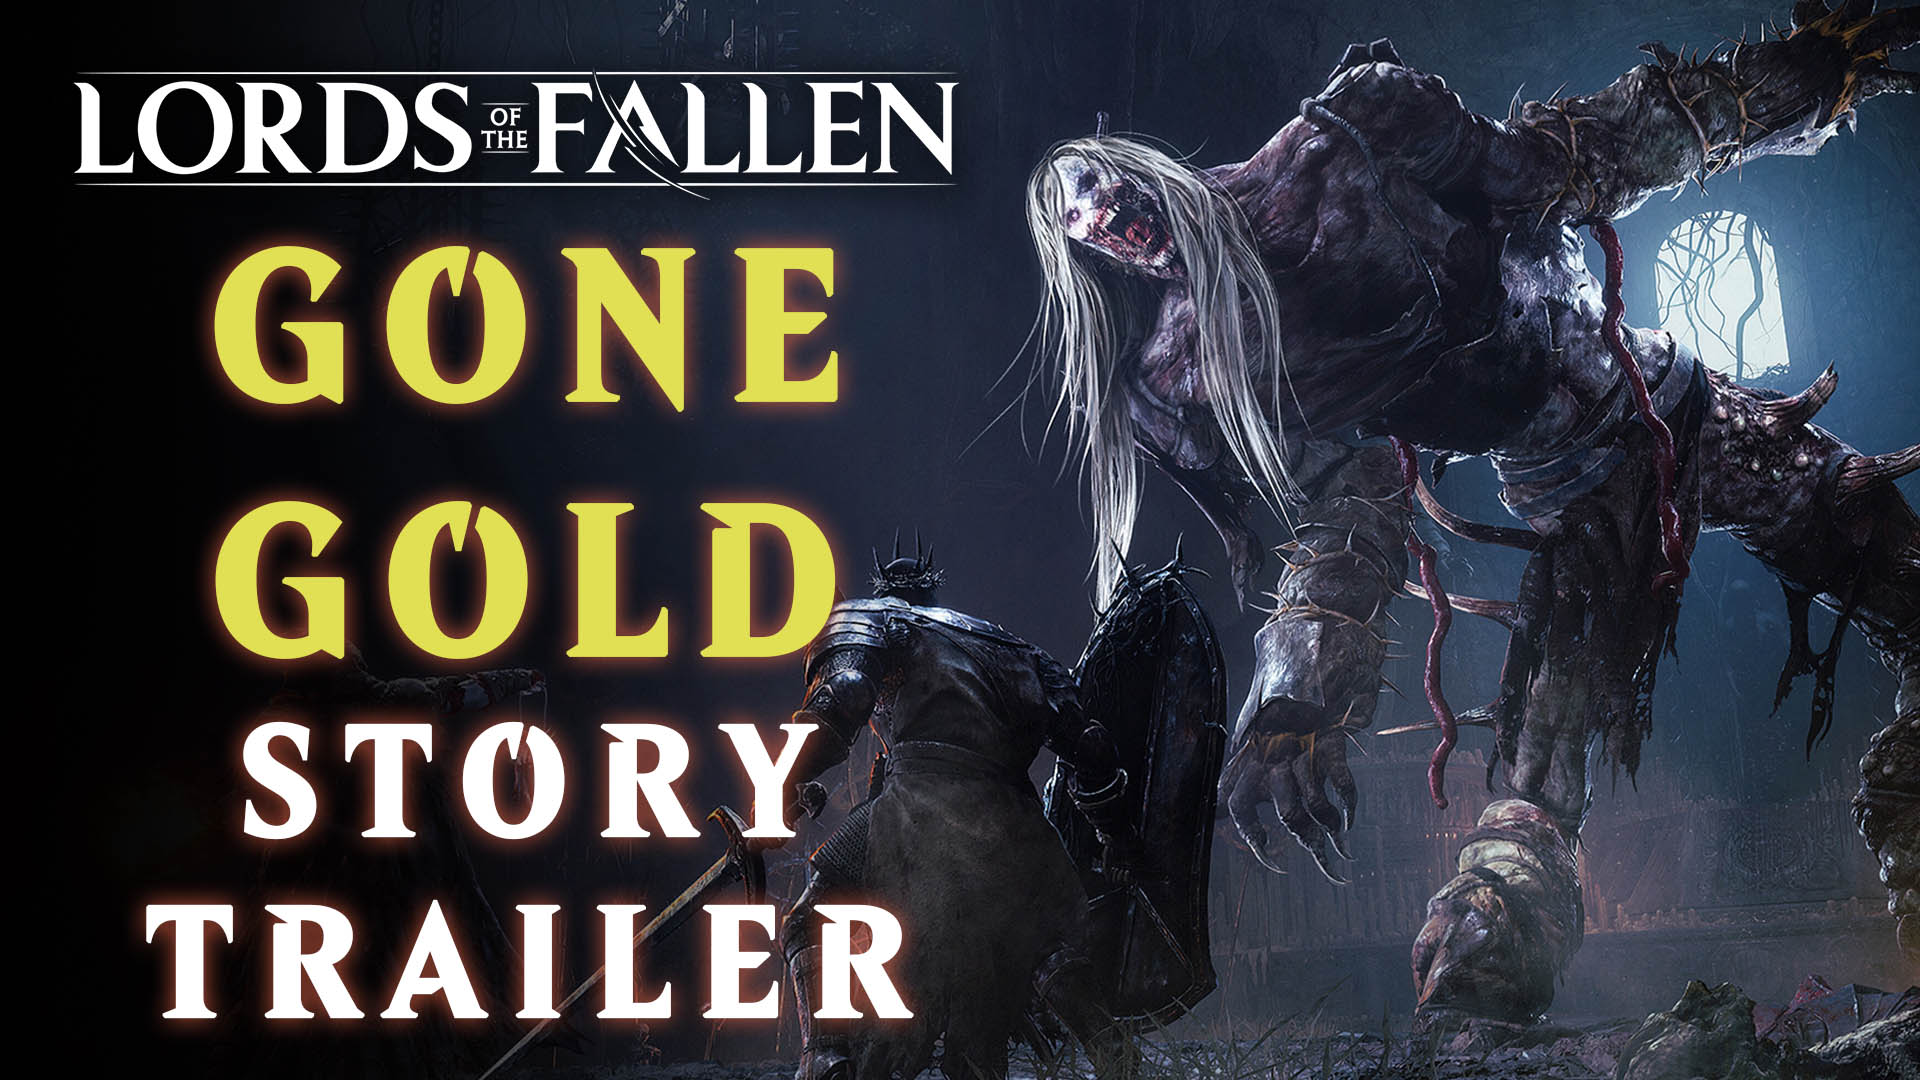 New The Lords Of The Fallen trailer is giving major Dark Souls